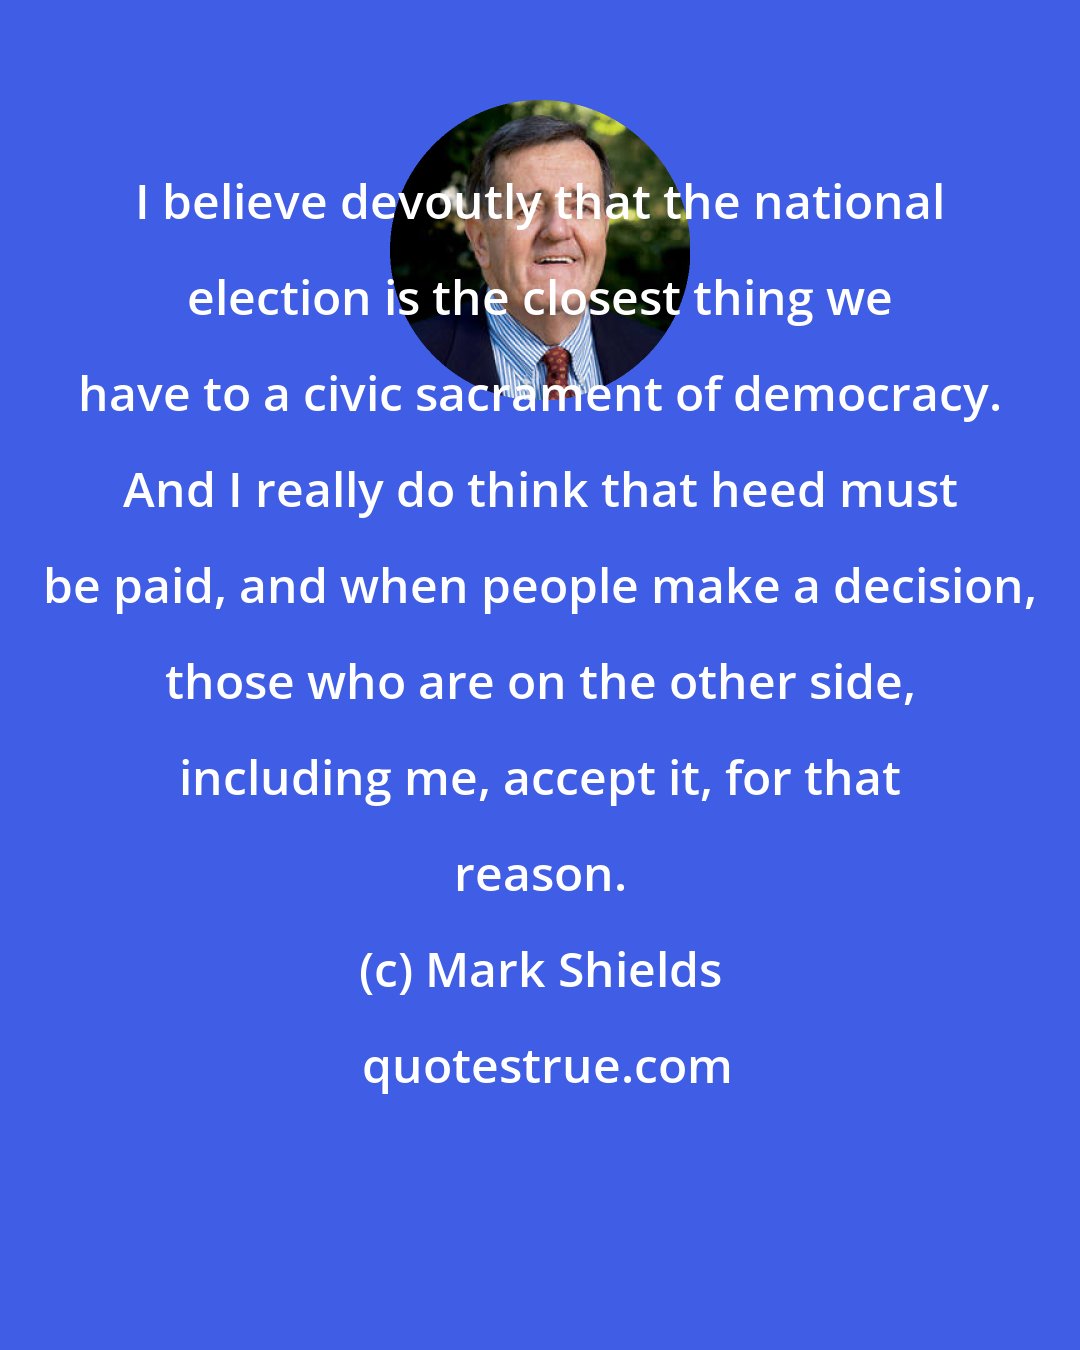 Mark Shields: I believe devoutly that the national election is the closest thing we have to a civic sacrament of democracy. And I really do think that heed must be paid, and when people make a decision, those who are on the other side, including me, accept it, for that reason.